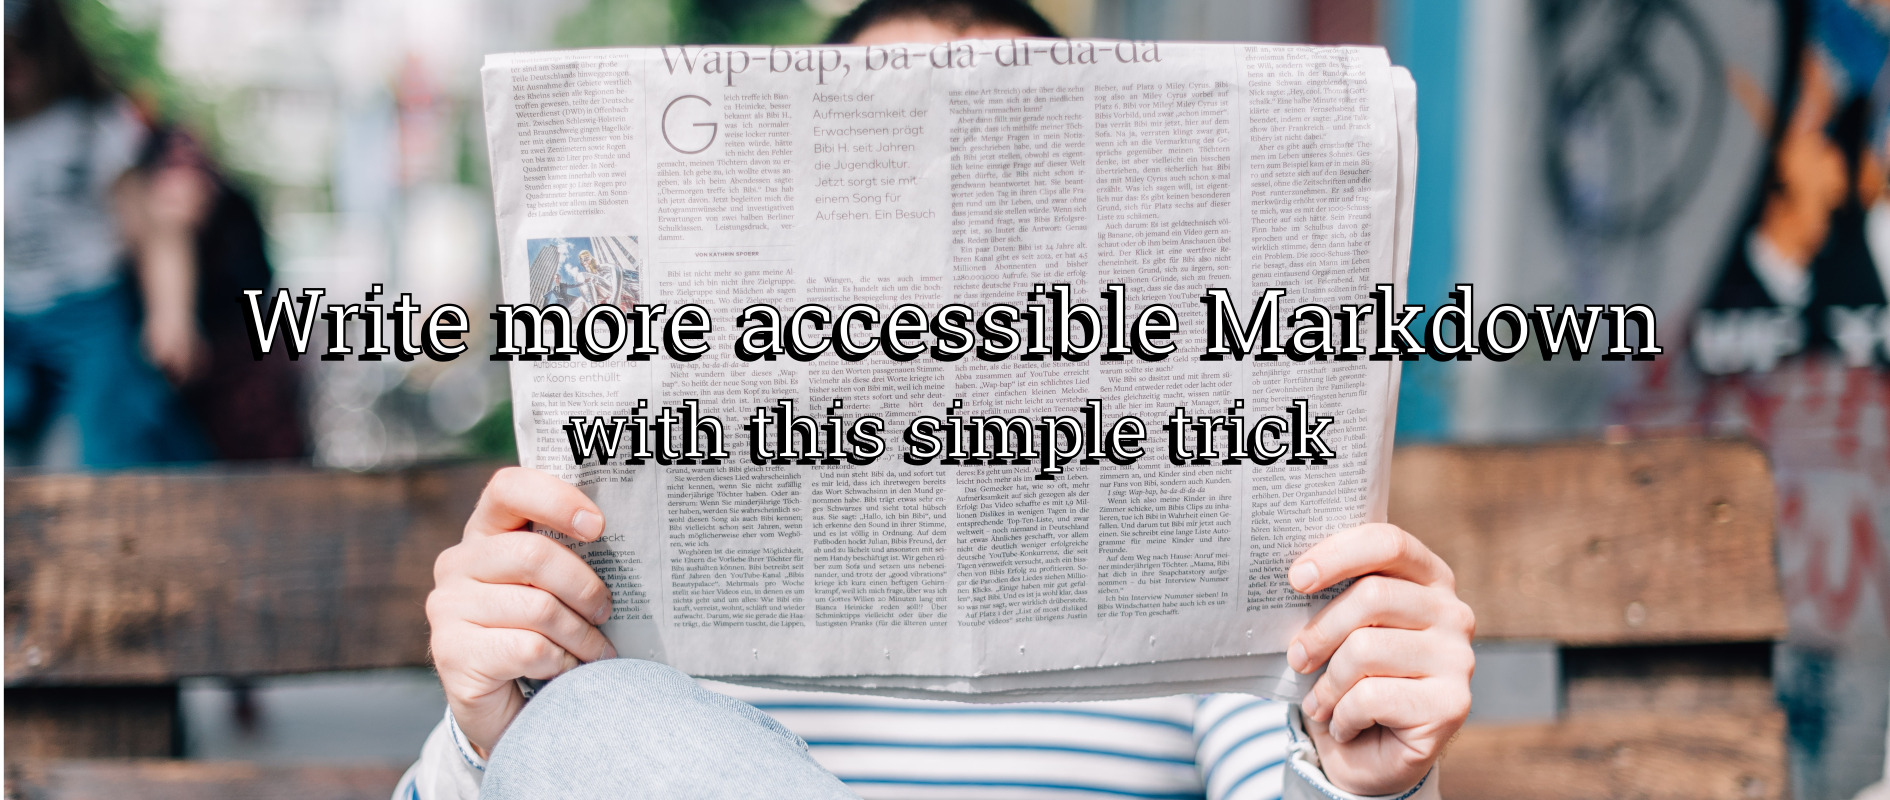 A person holding a newspaper in front of their face, with text overlaid on top: "Write more accessible Markdown with this simple trick"